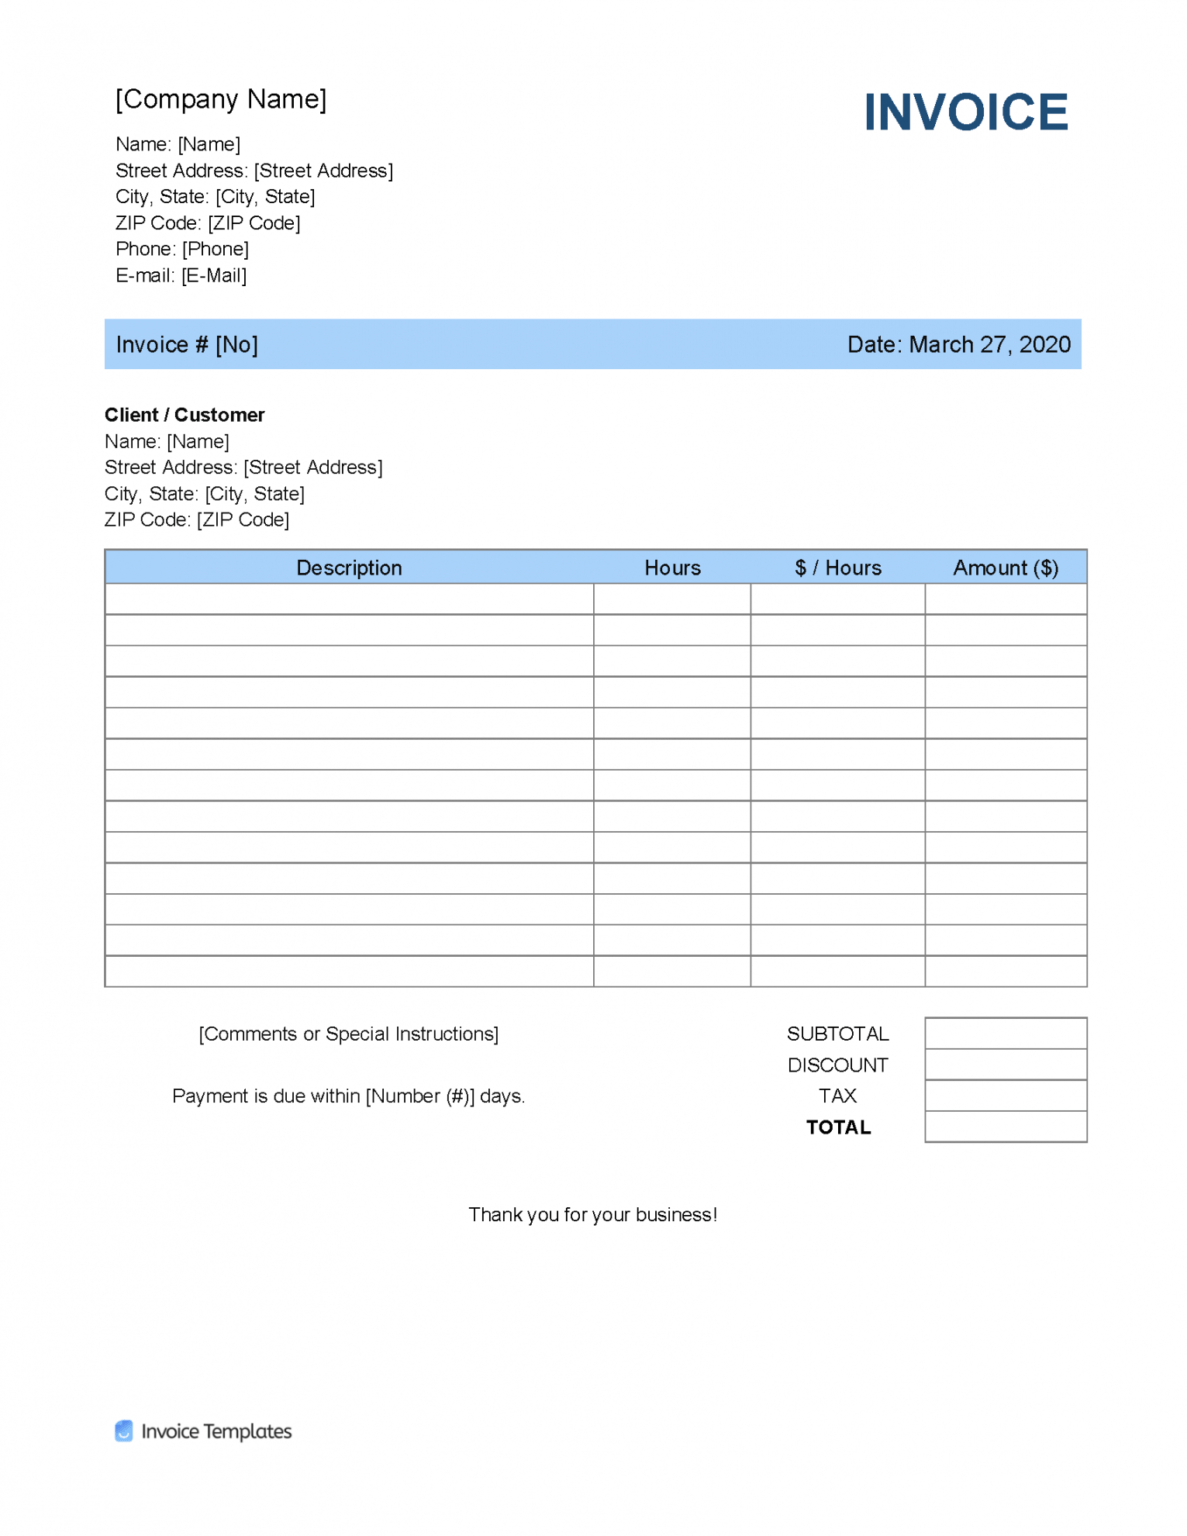 free-download-invoice-template-excel-invoice-template-ideas-askxz